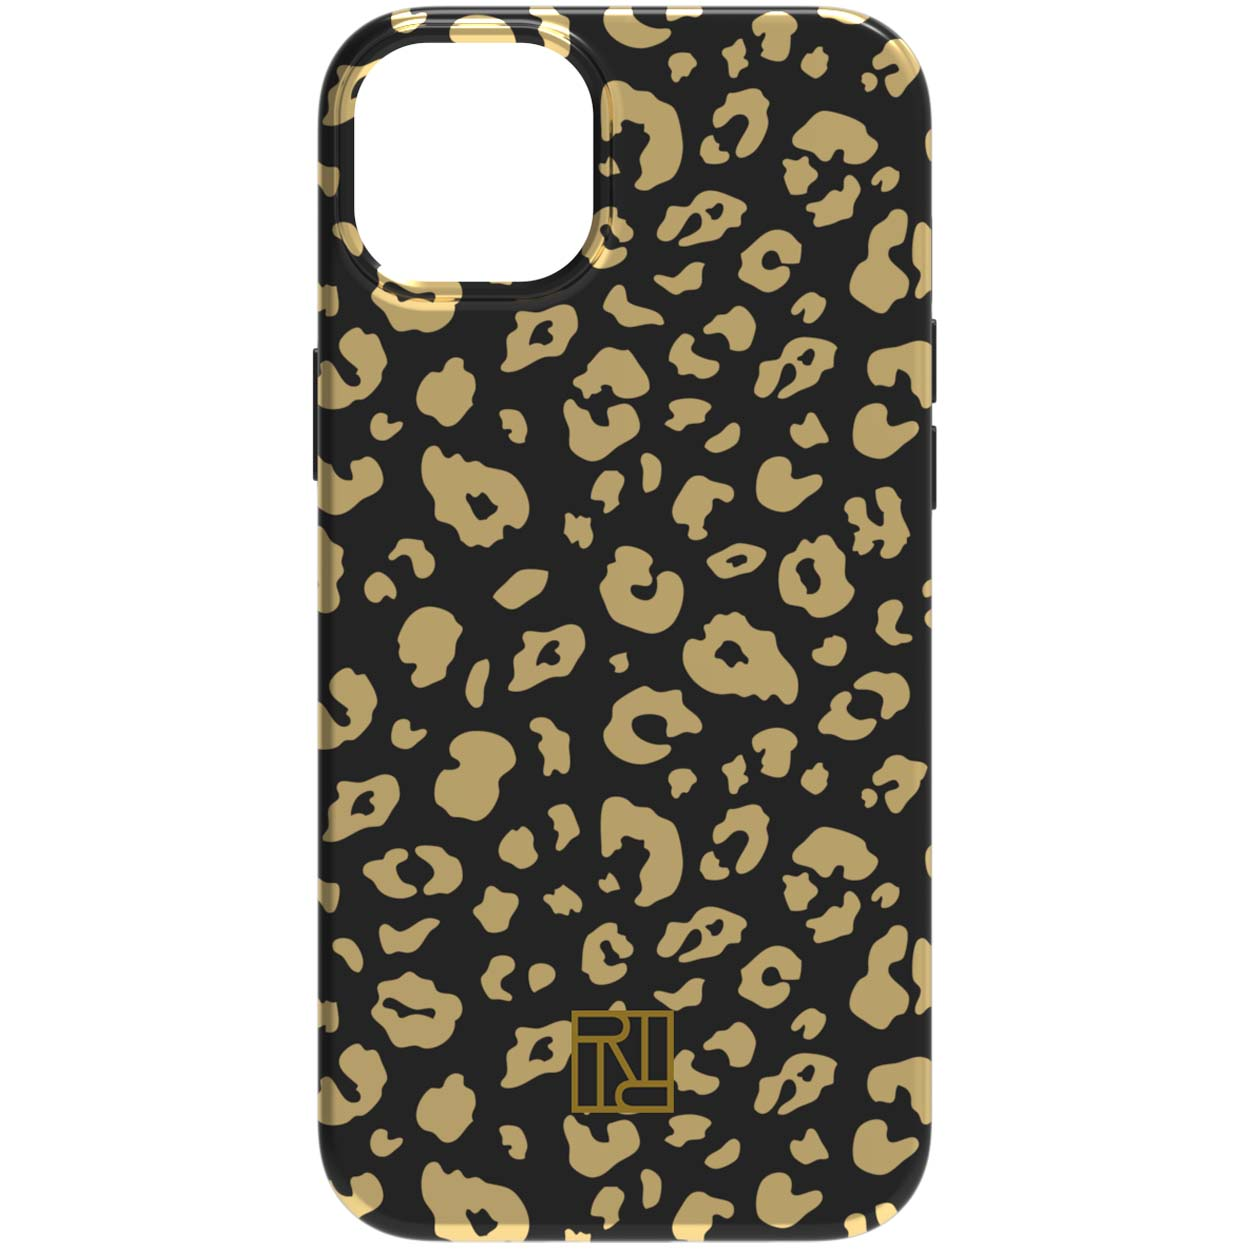 RICHMOND & FINCH Gold 14 PLUS, IPHONE COLOURFUL Backcover, Leopard, APPLE